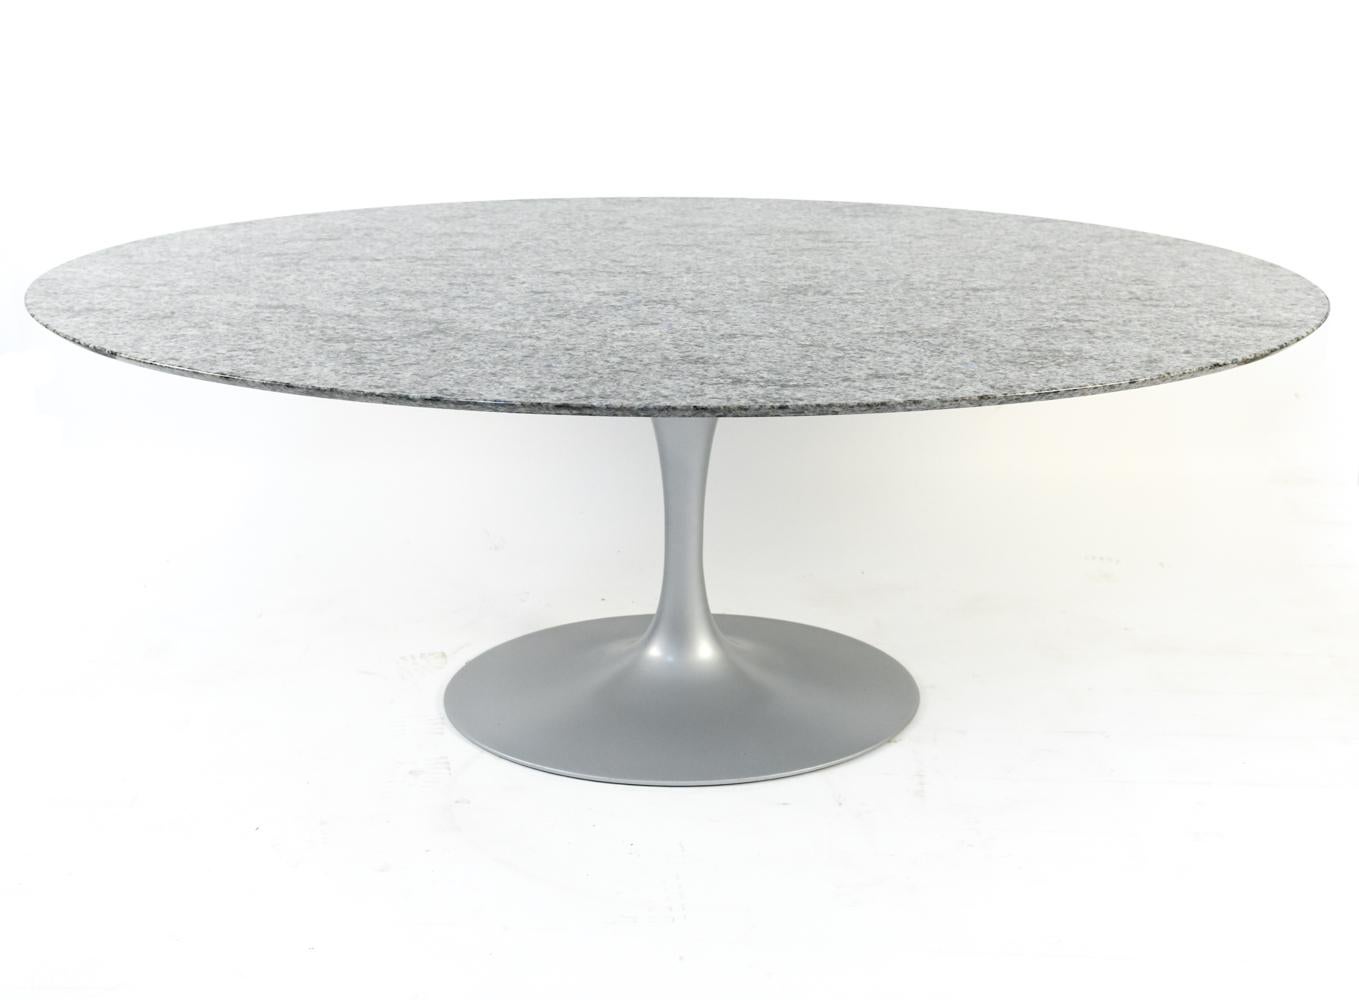 In the classic tulip form, this dining table was designed by Eero Saarinen and produced by Knoll as part of the 50th Anniversary collection, sporting the Knoll label underneath. This particular tables features a silver-tone tulip base with an oval